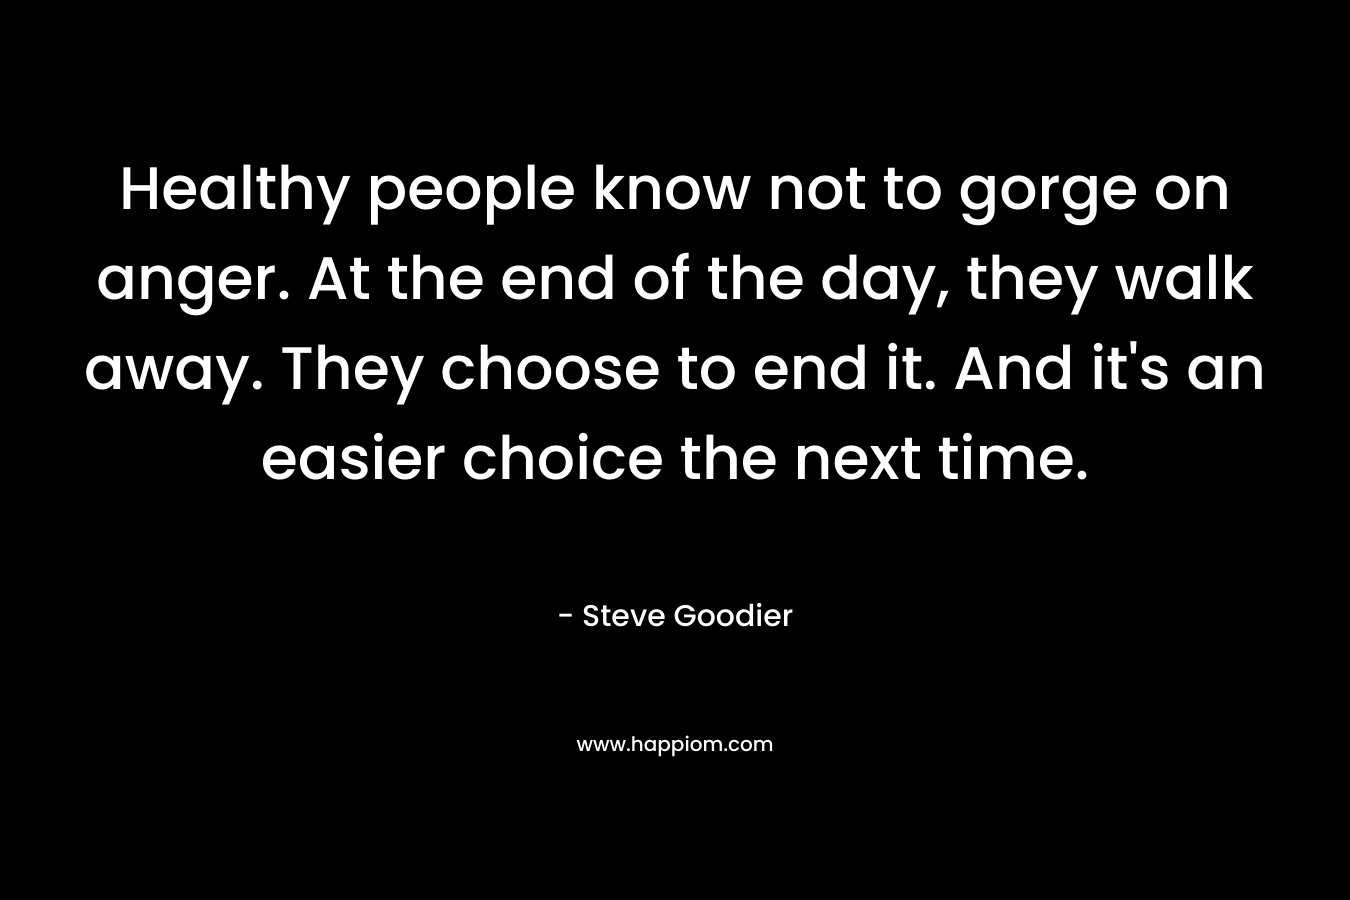 Healthy people know not to gorge on anger. At the end of the day, they walk away. They choose to end it. And it's an easier choice the next time.